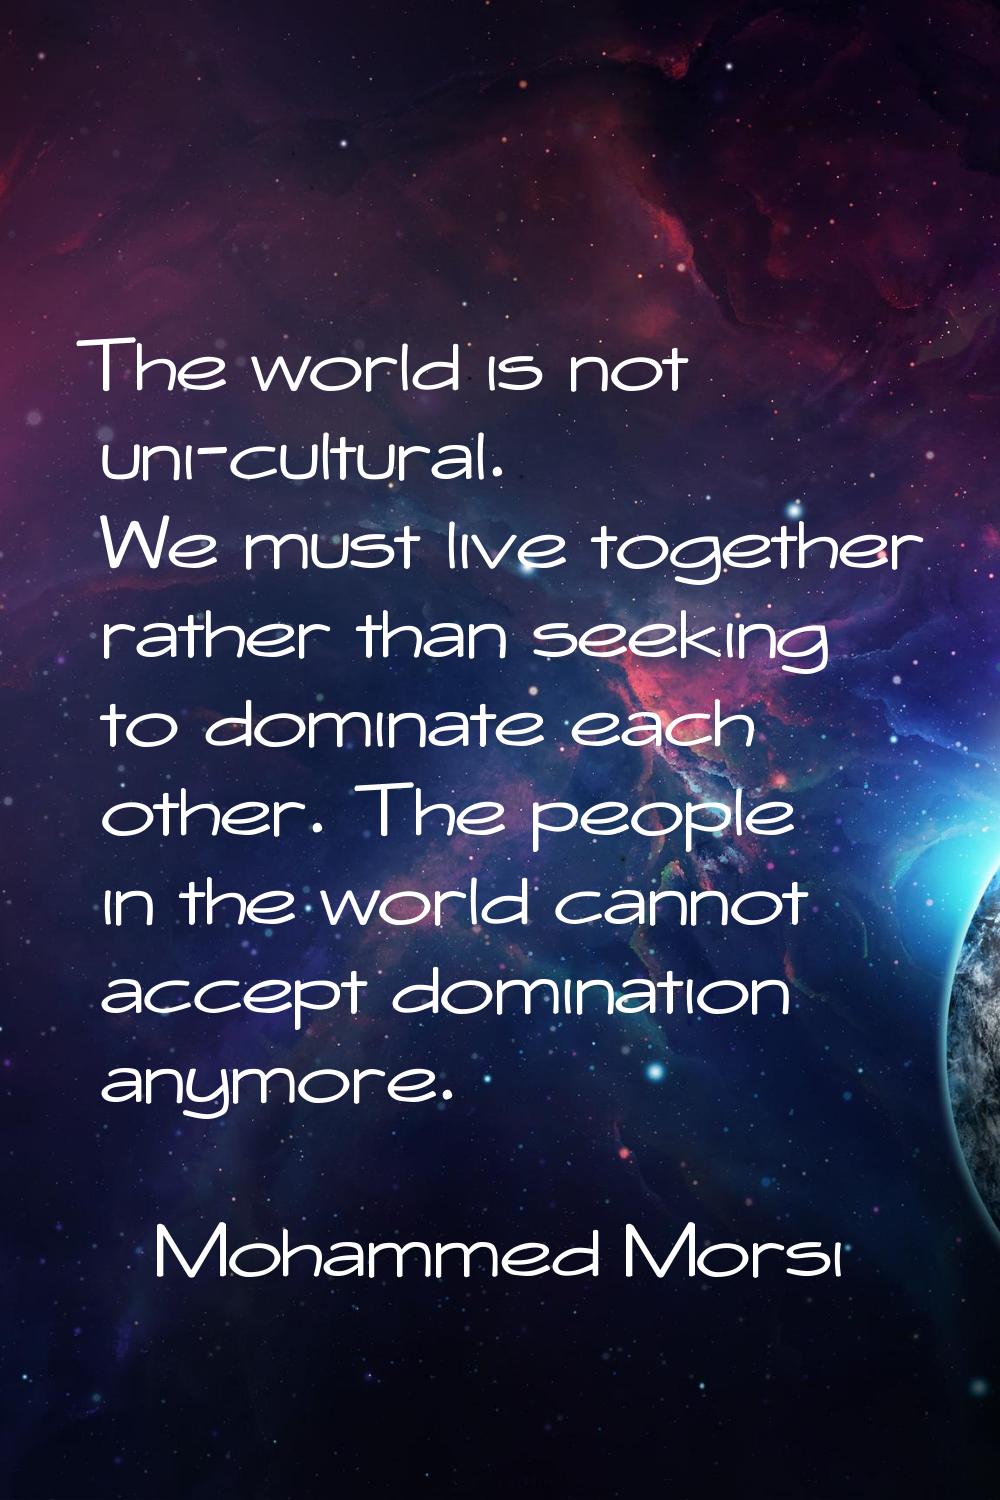 The world is not uni-cultural. We must live together rather than seeking to dominate each other. Th